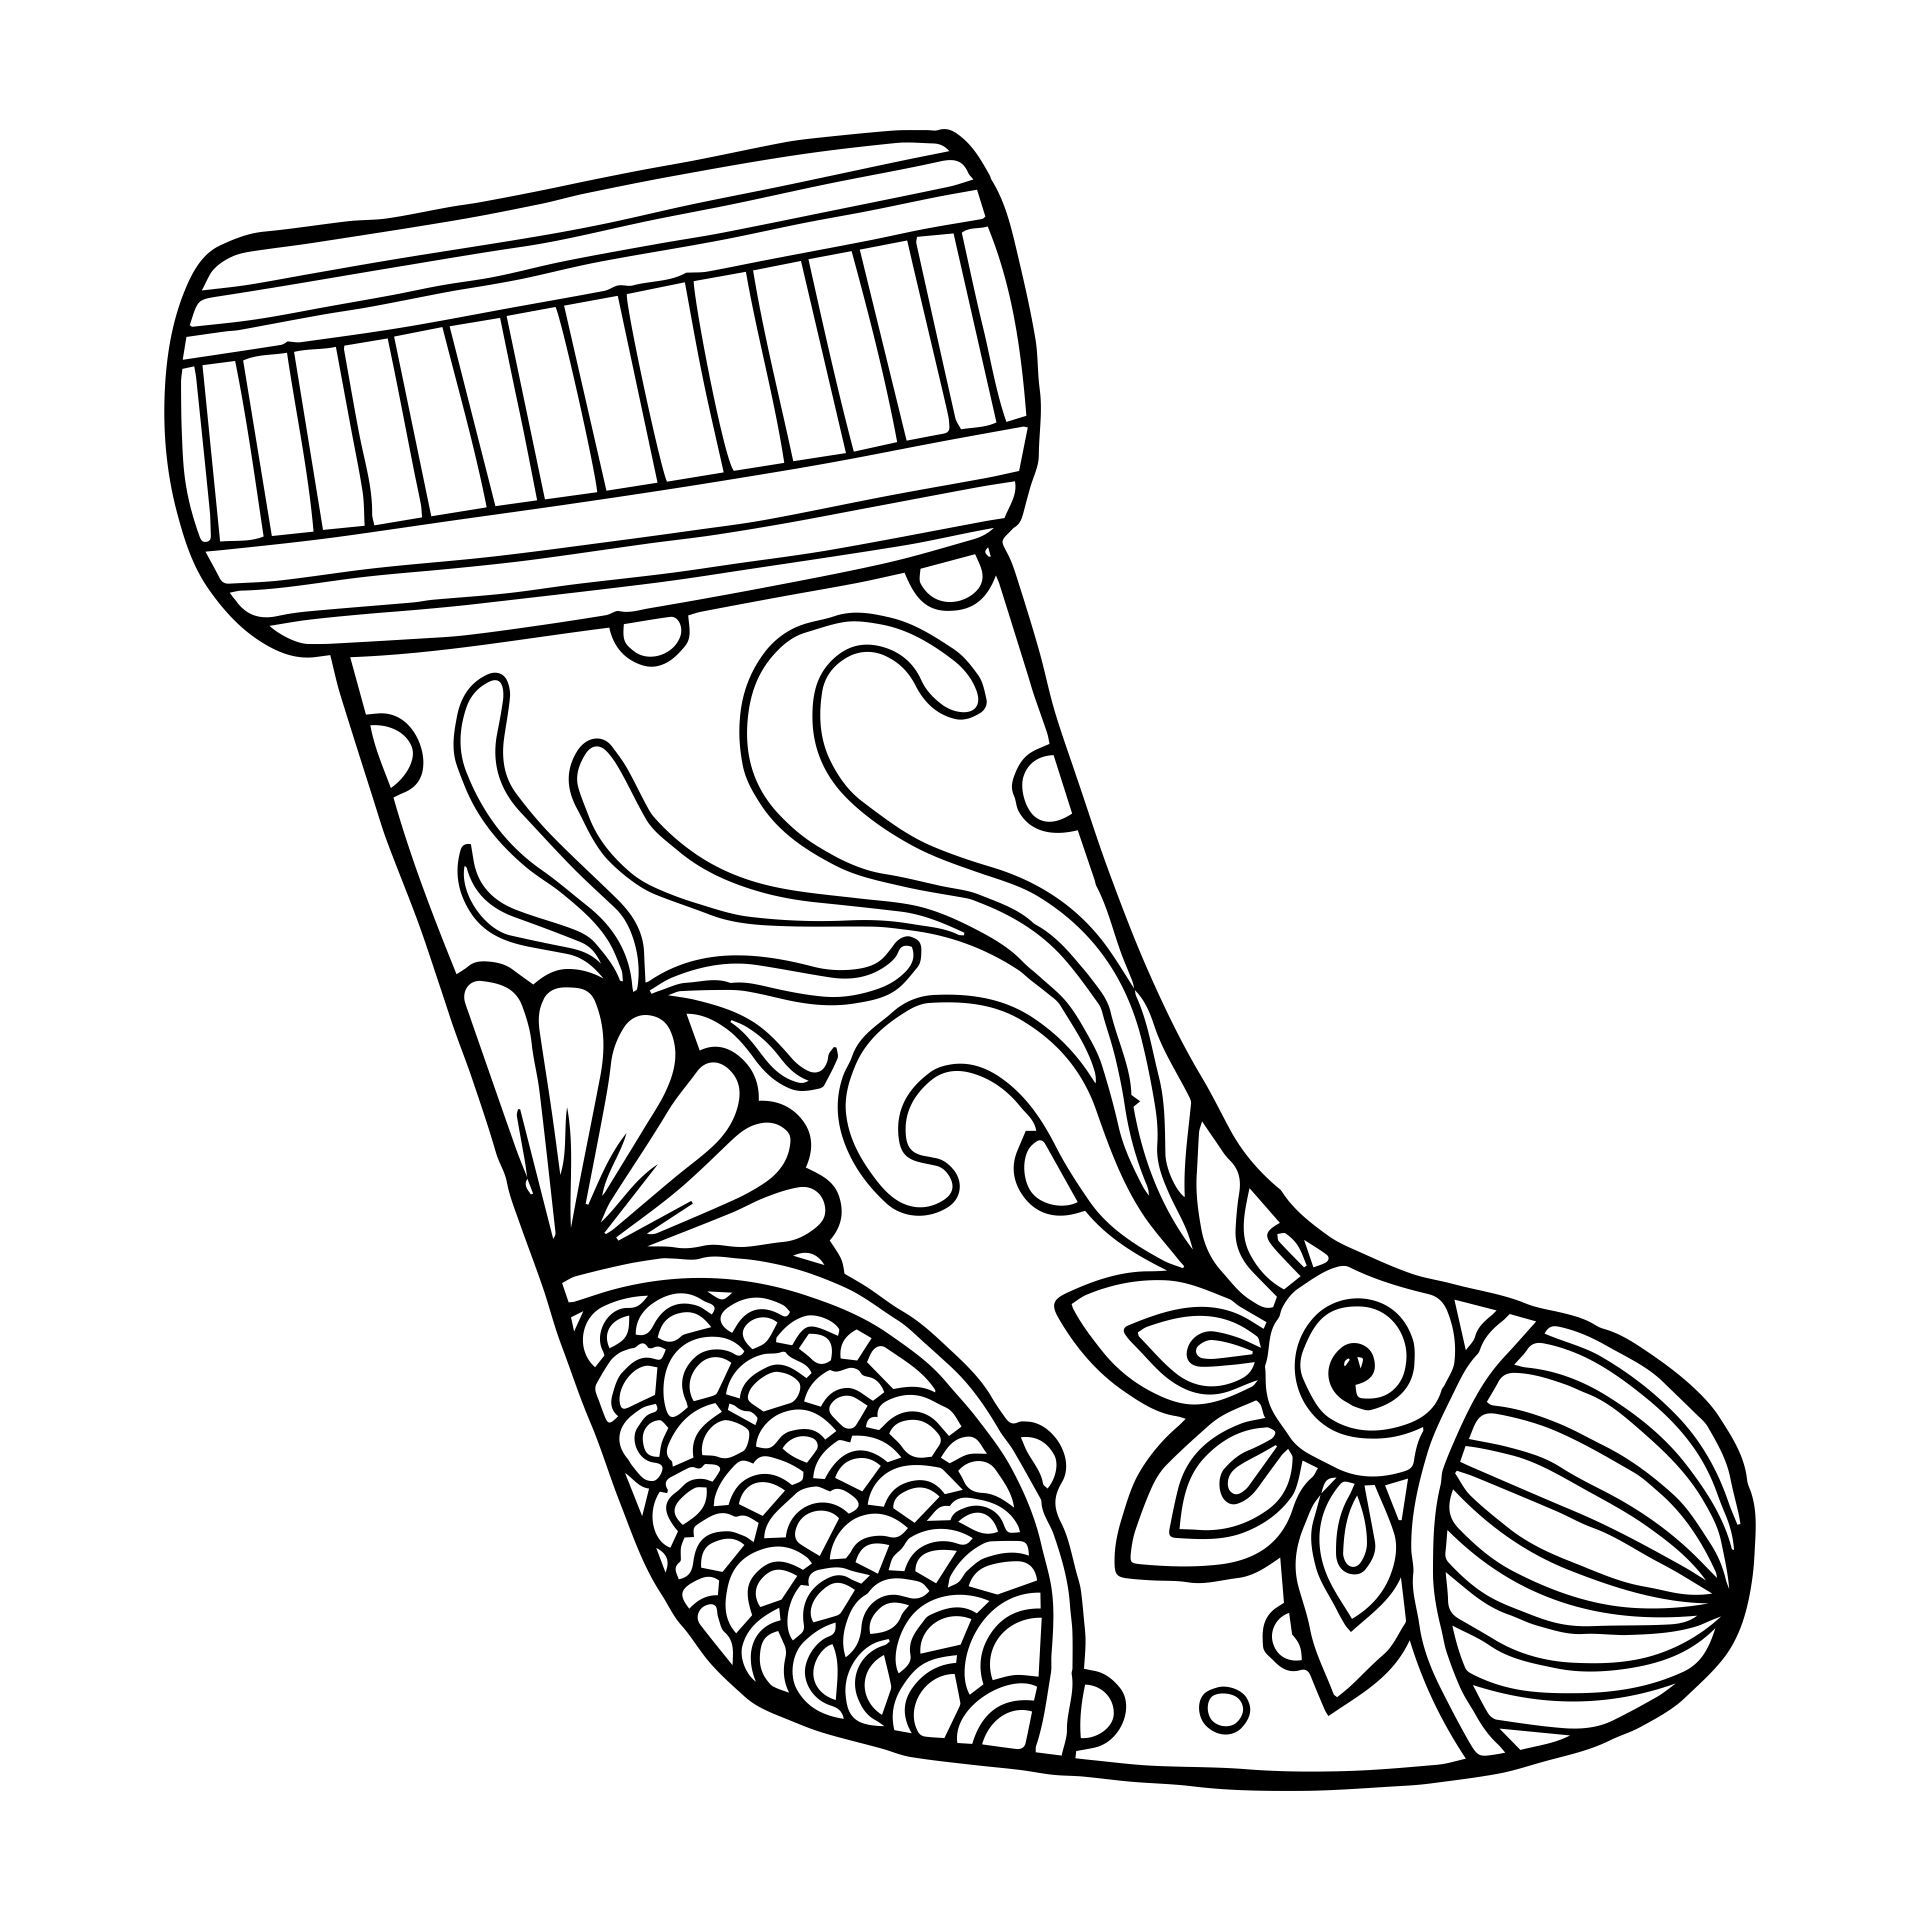 Christmas For Adults Patterned Stockings Coloring Pages Printable